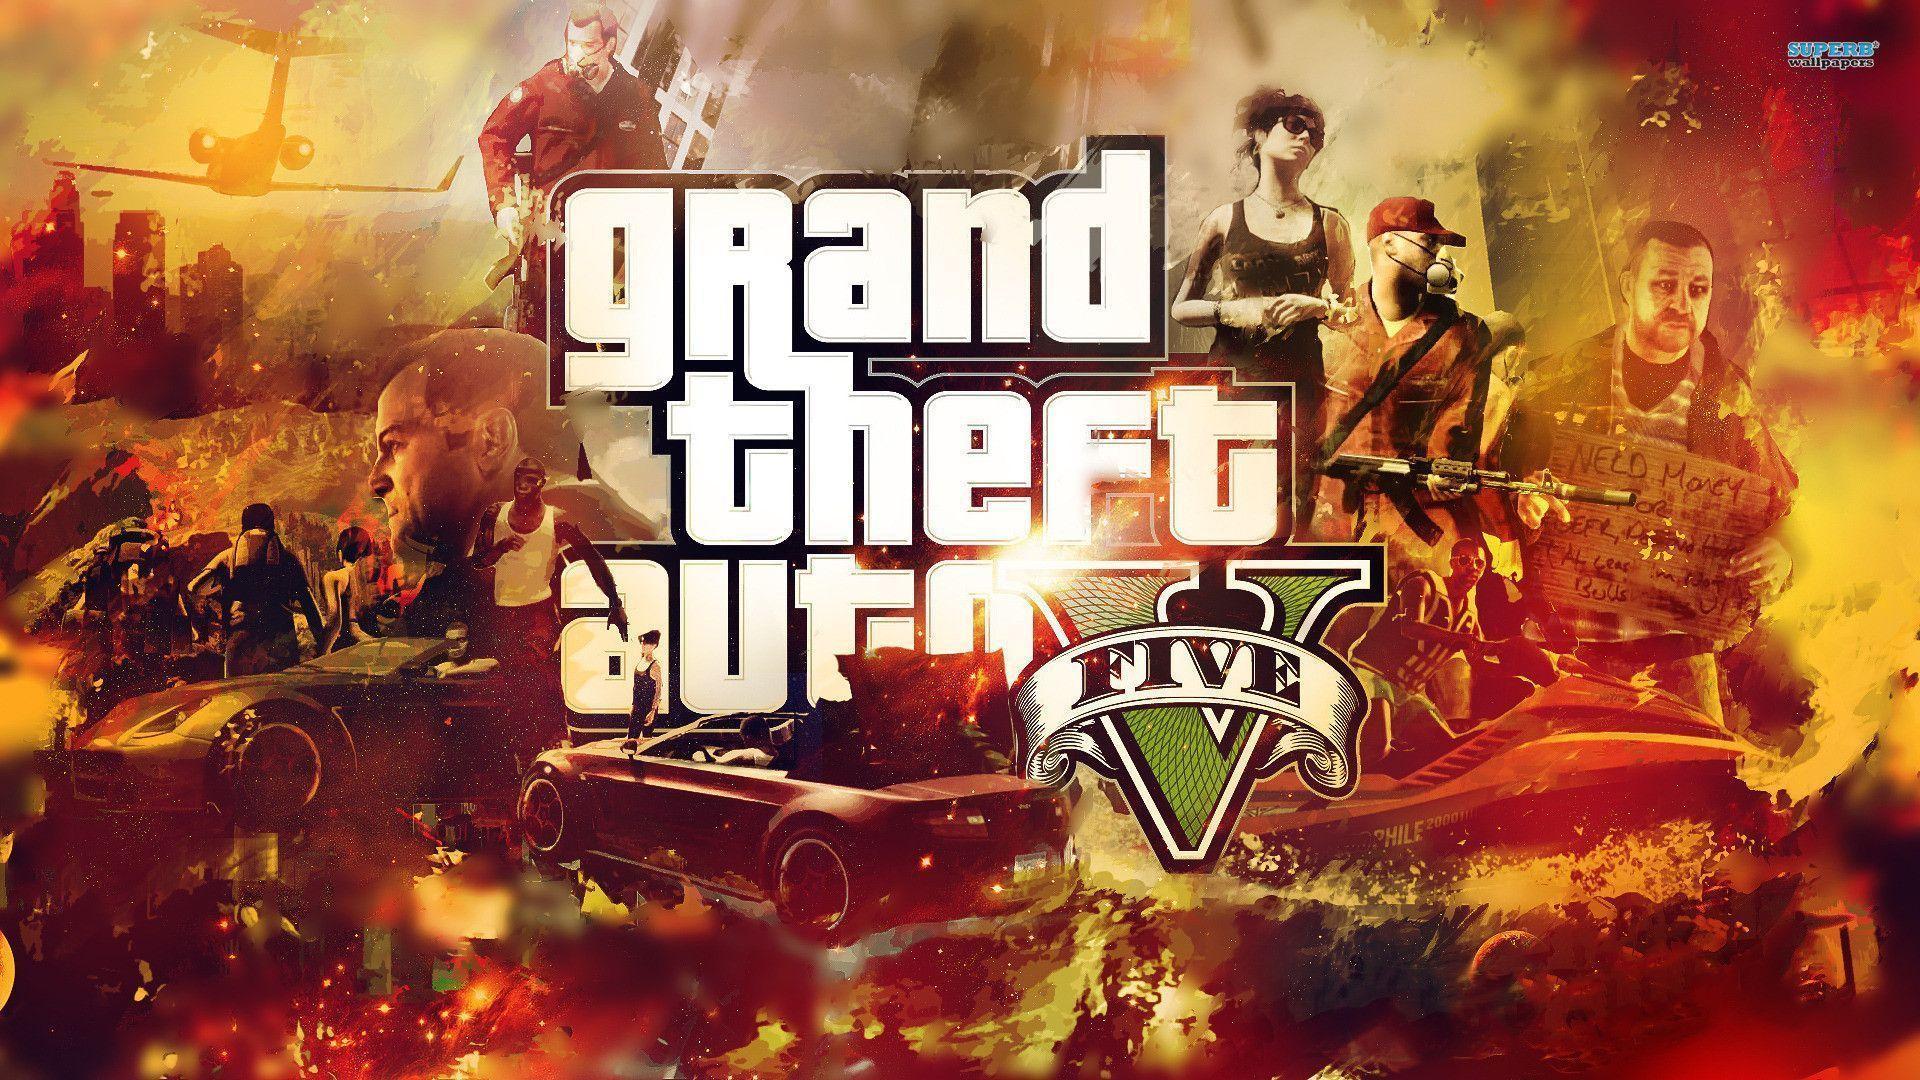 Grand Theft Auto V wallpapers